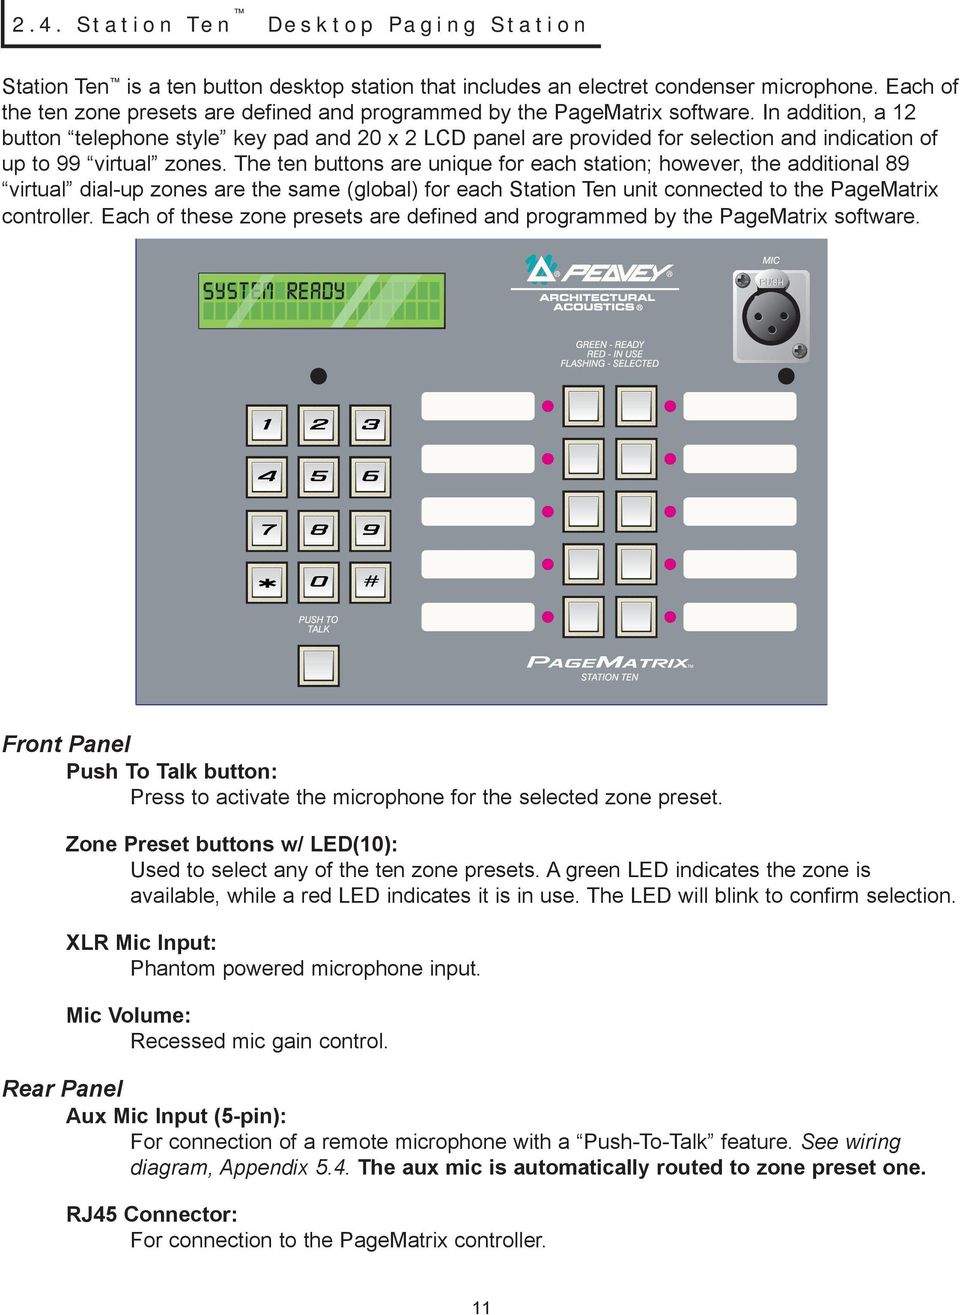 In addition, a 12 button Òtelephone styleó key pad and 20 x 2 LCD panel are provided for selection and indication of up to 99 ÒvirtualÓ zones.